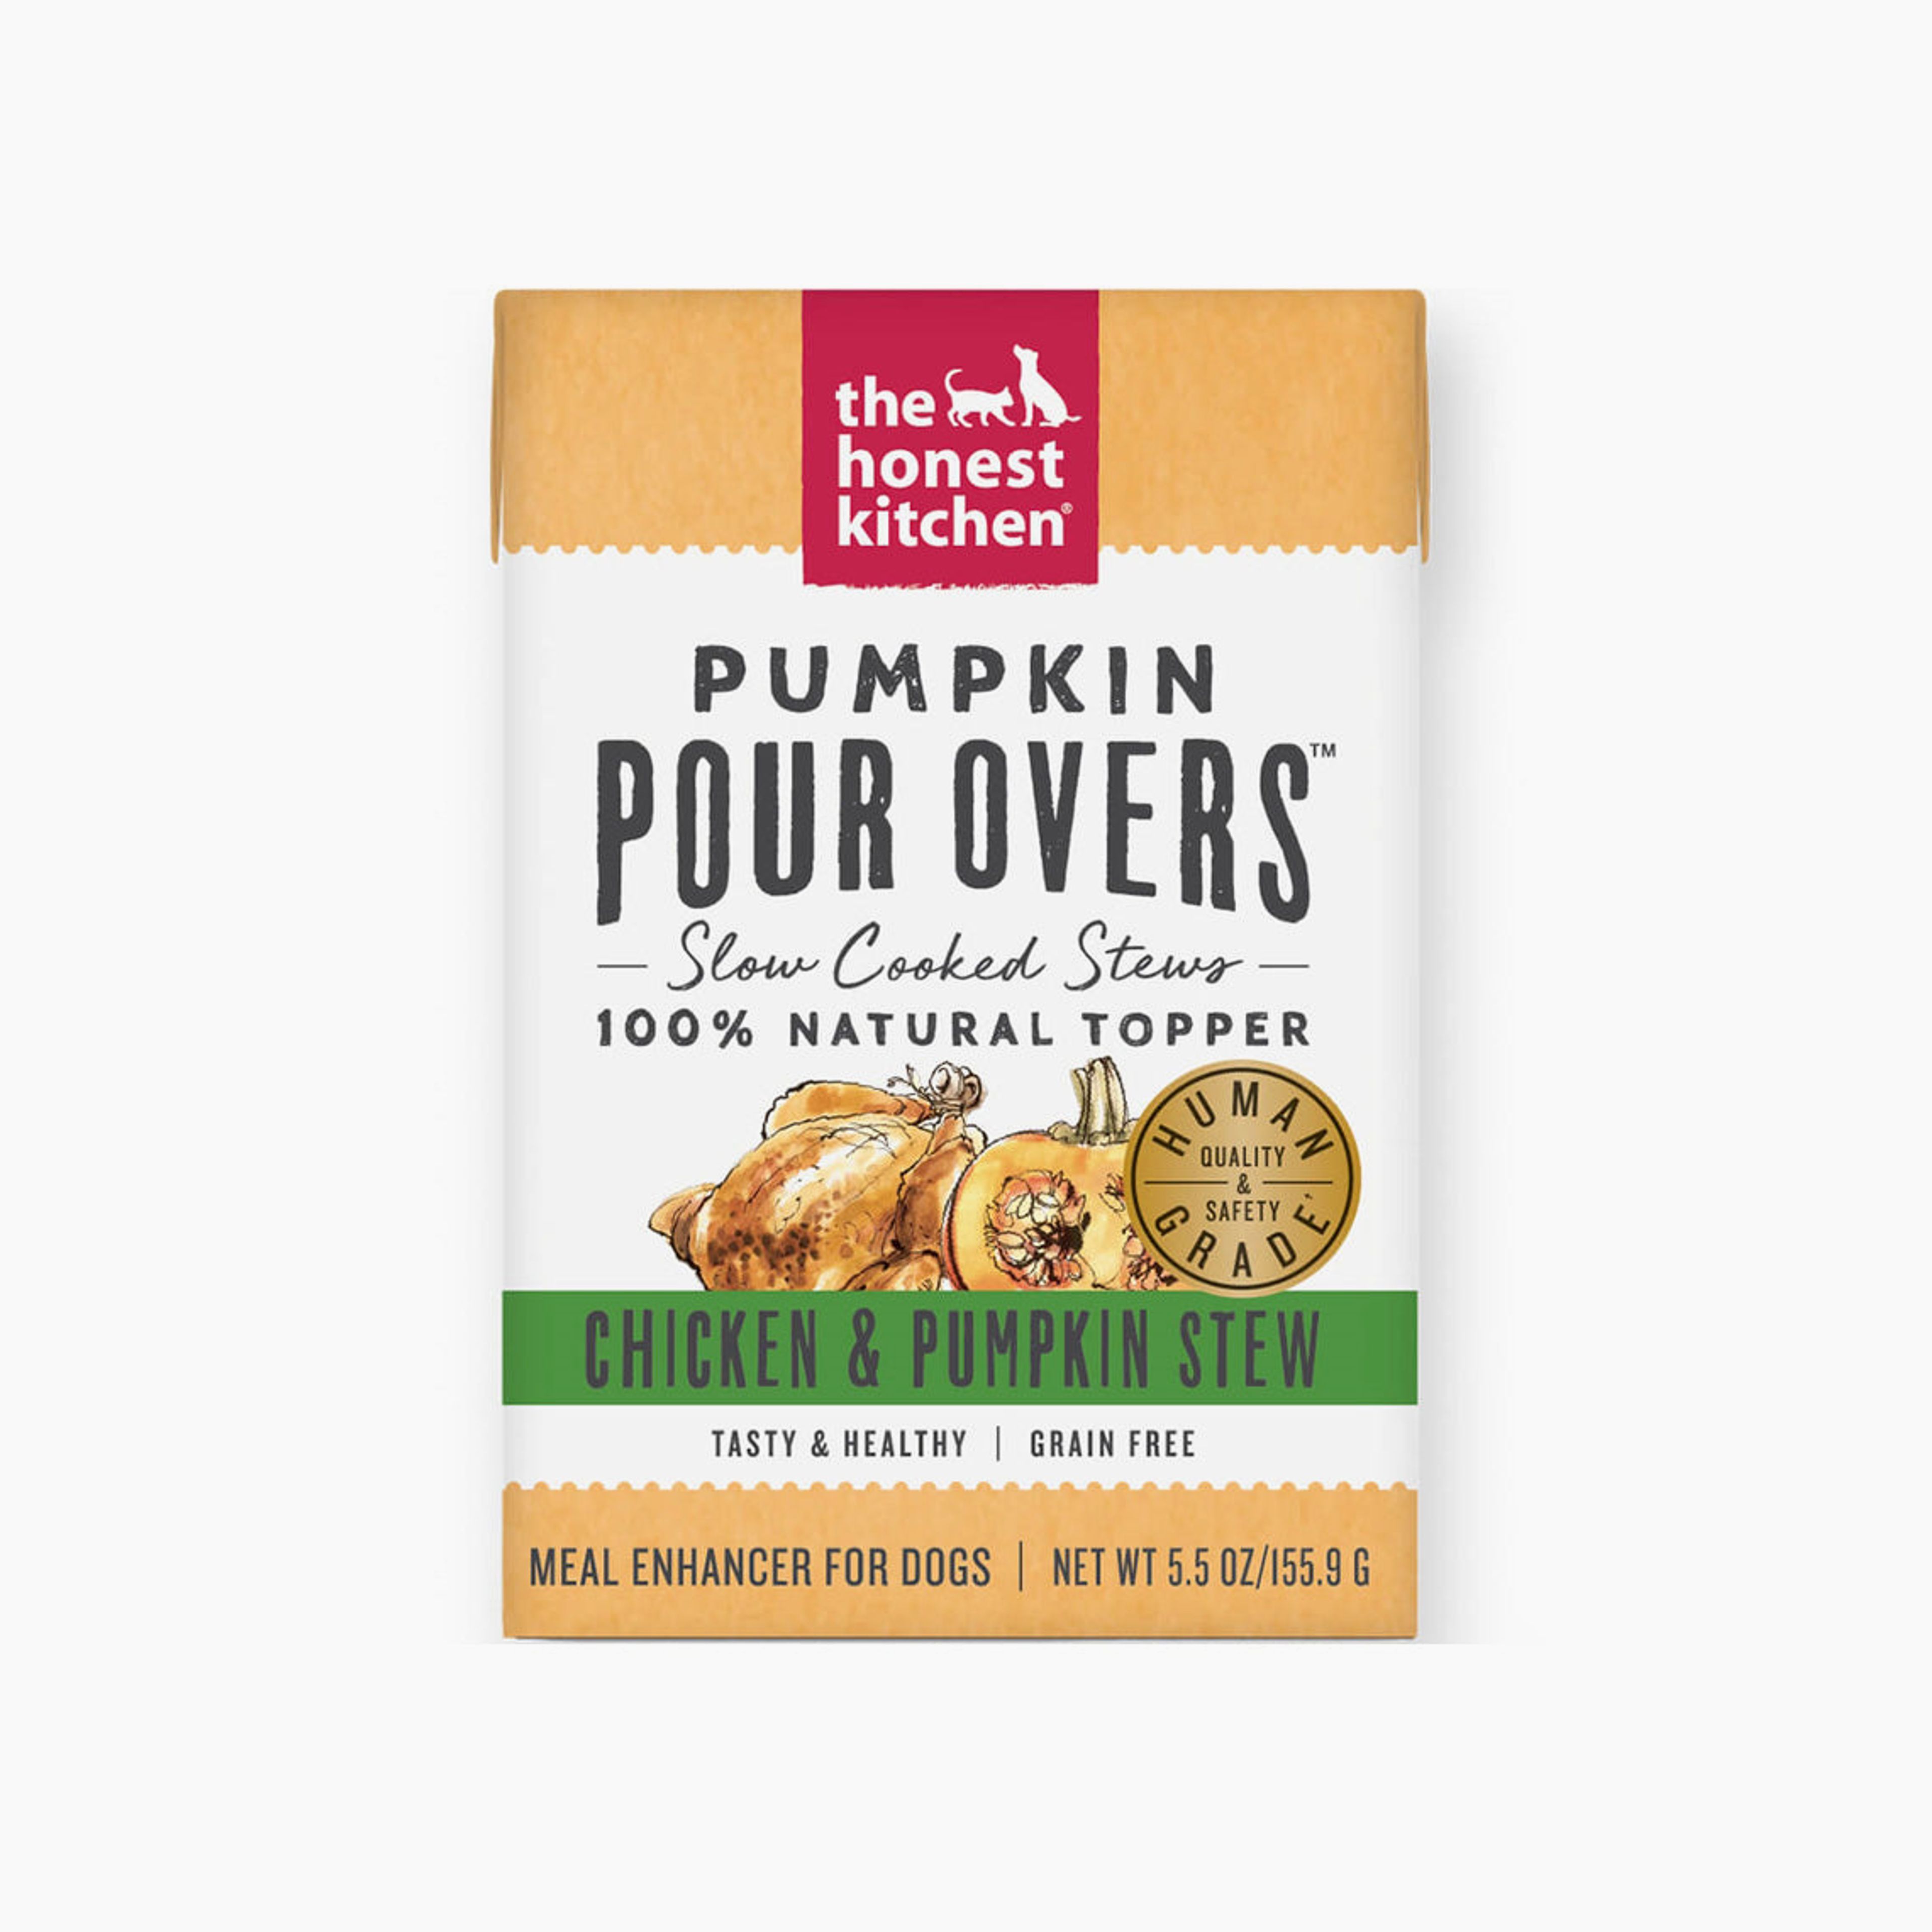 The Honest Kitchen Pumpkin Pour Overs Slow Cooked Meal Enhancer for Dogs